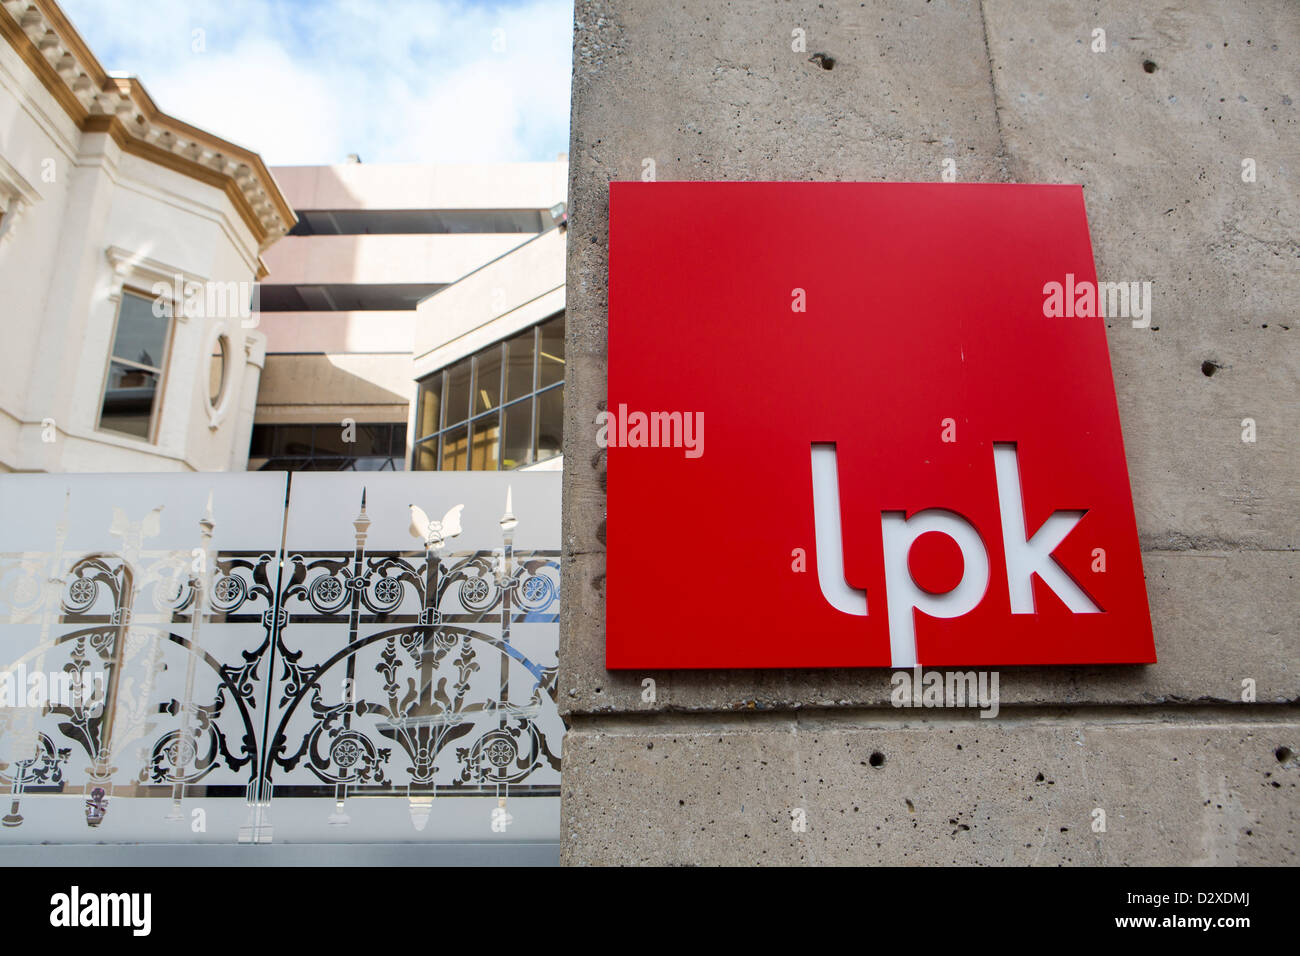 The headquarters of product design firm LPK.  Stock Photo